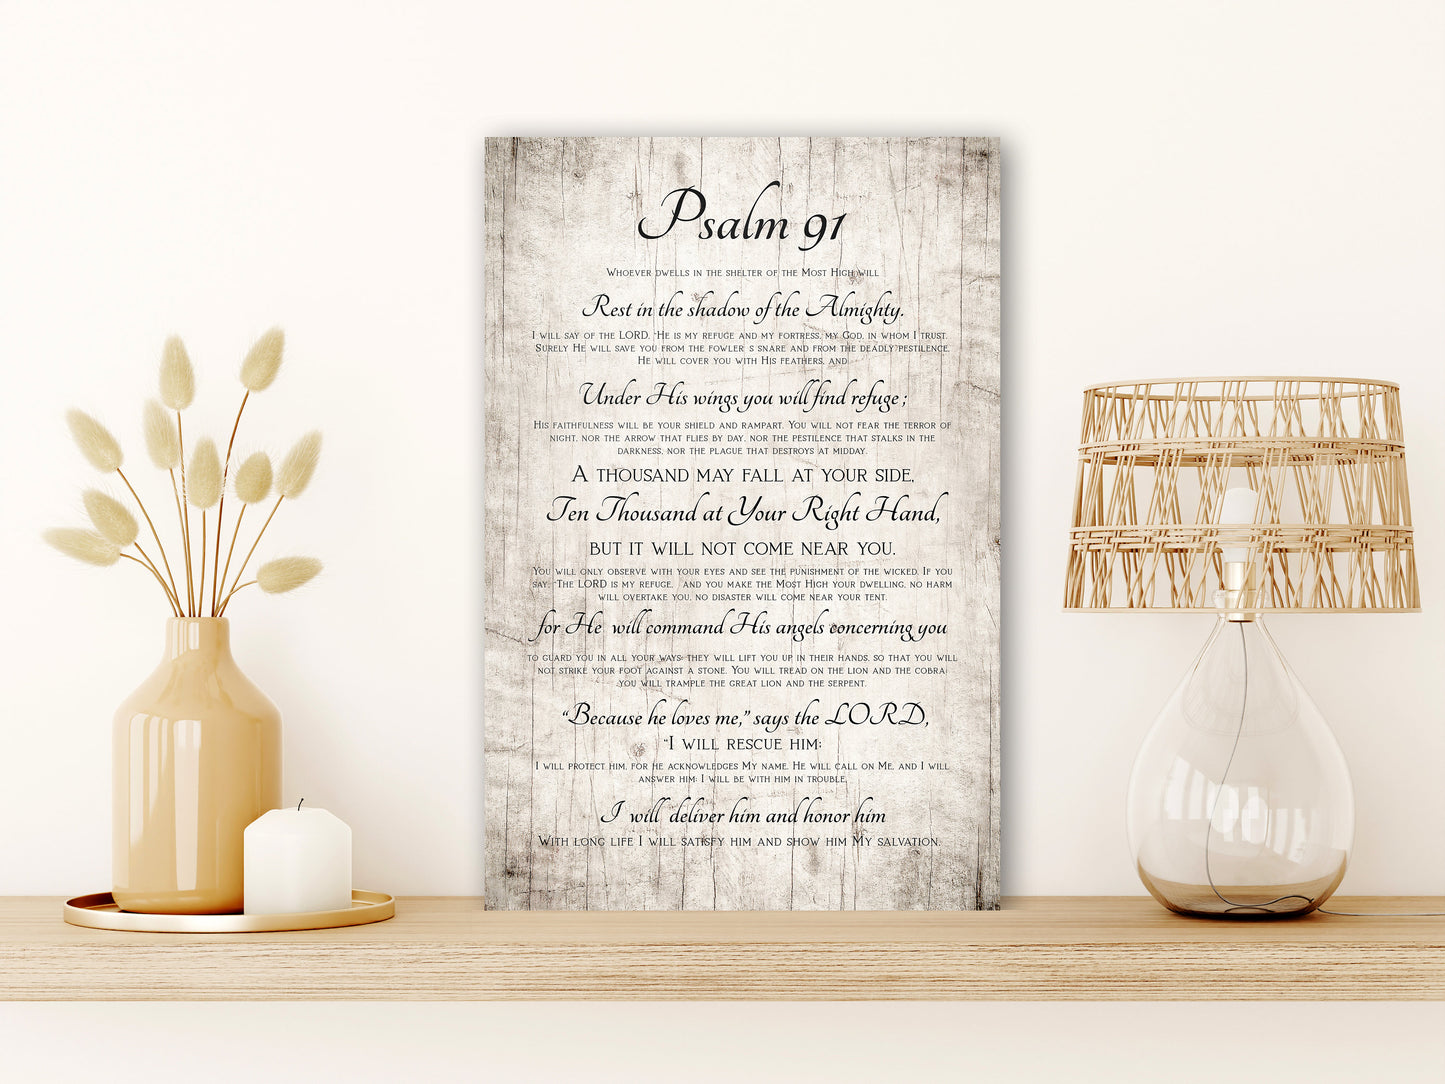 Military Spouse Gift, The Soldier's Psalm 91 Wall Decor, Protection Prayer, Inpirational, Wooden Decor, Encouraging Bible Verse Art, for her